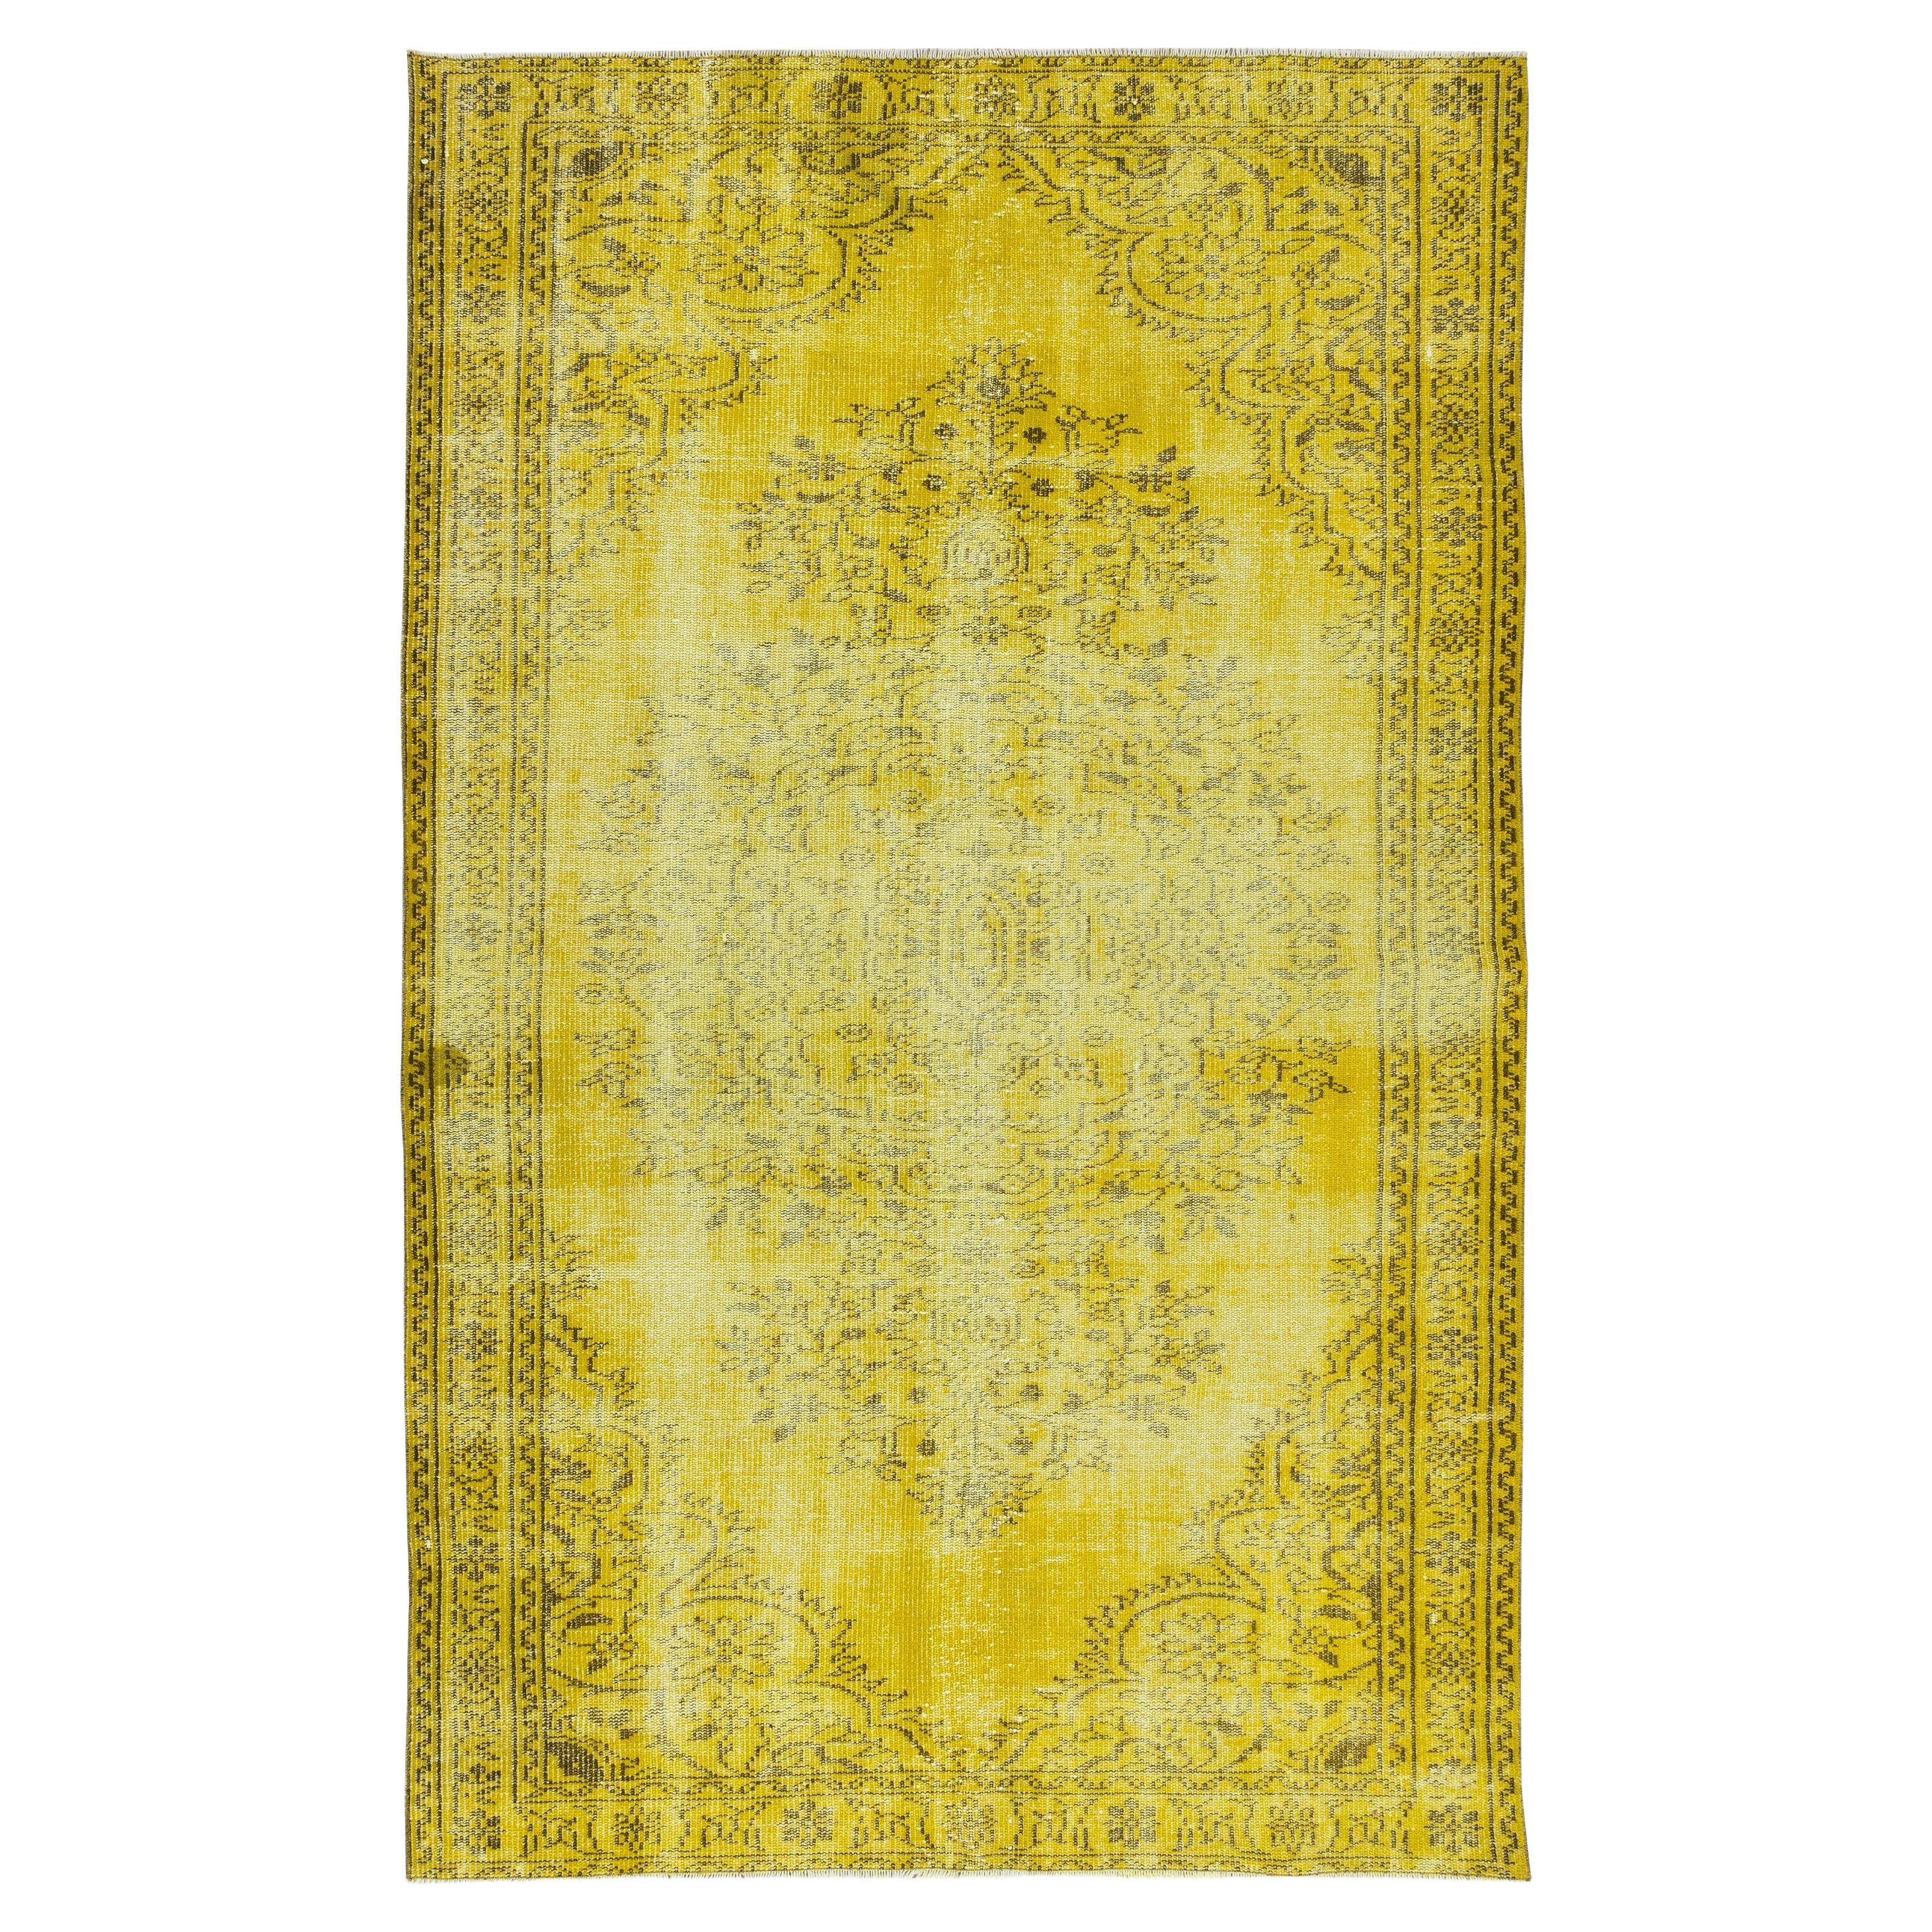 5.4x8.7 Ft Vintage Turkish Wool Rug OverDyed in Yellow. Great 4 Modern Interiors